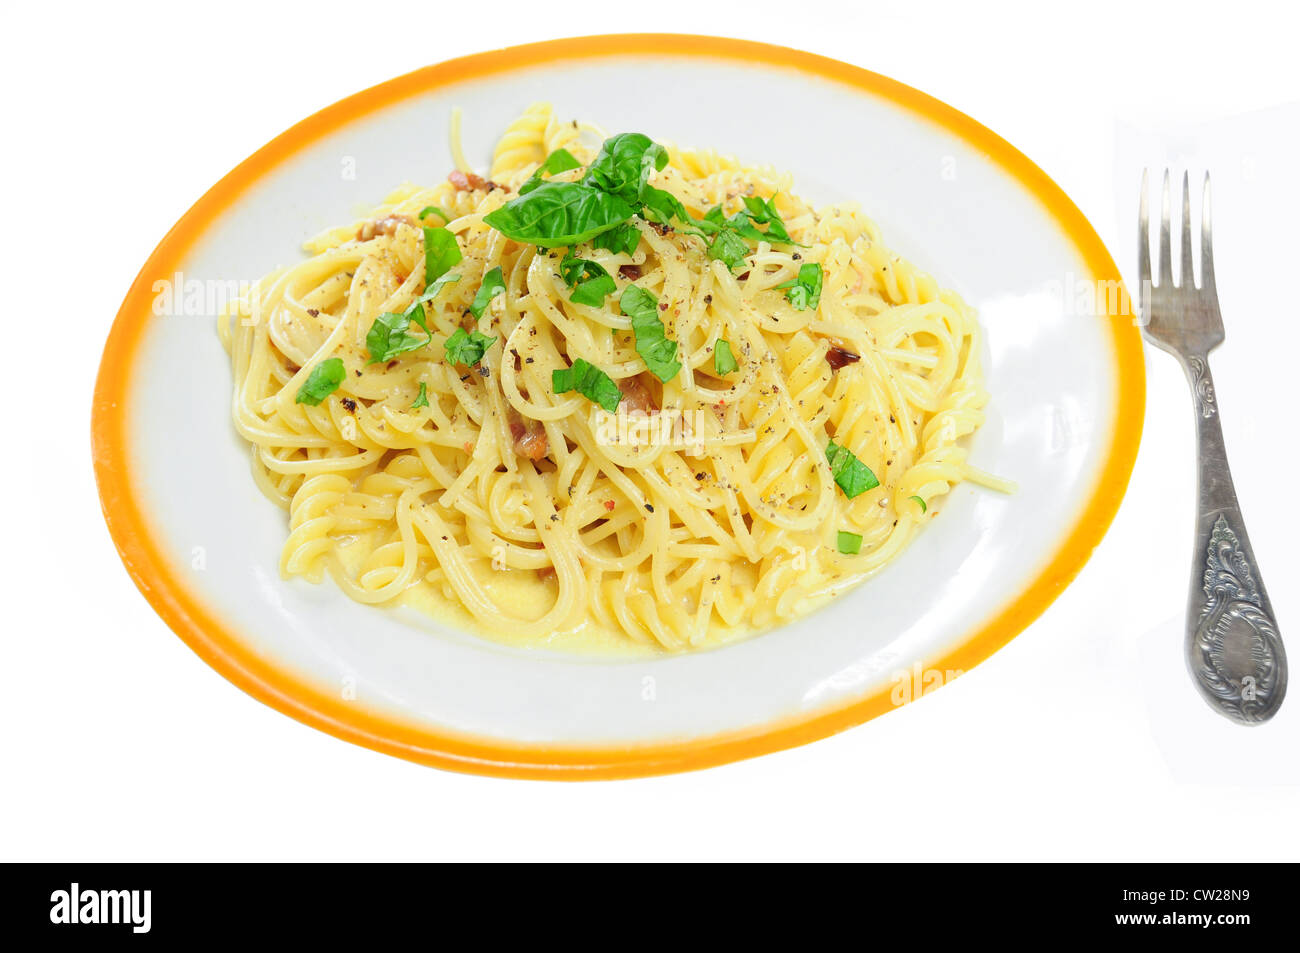 Closeup view of spaghetti carbonara in plate, isolated Stock Photo